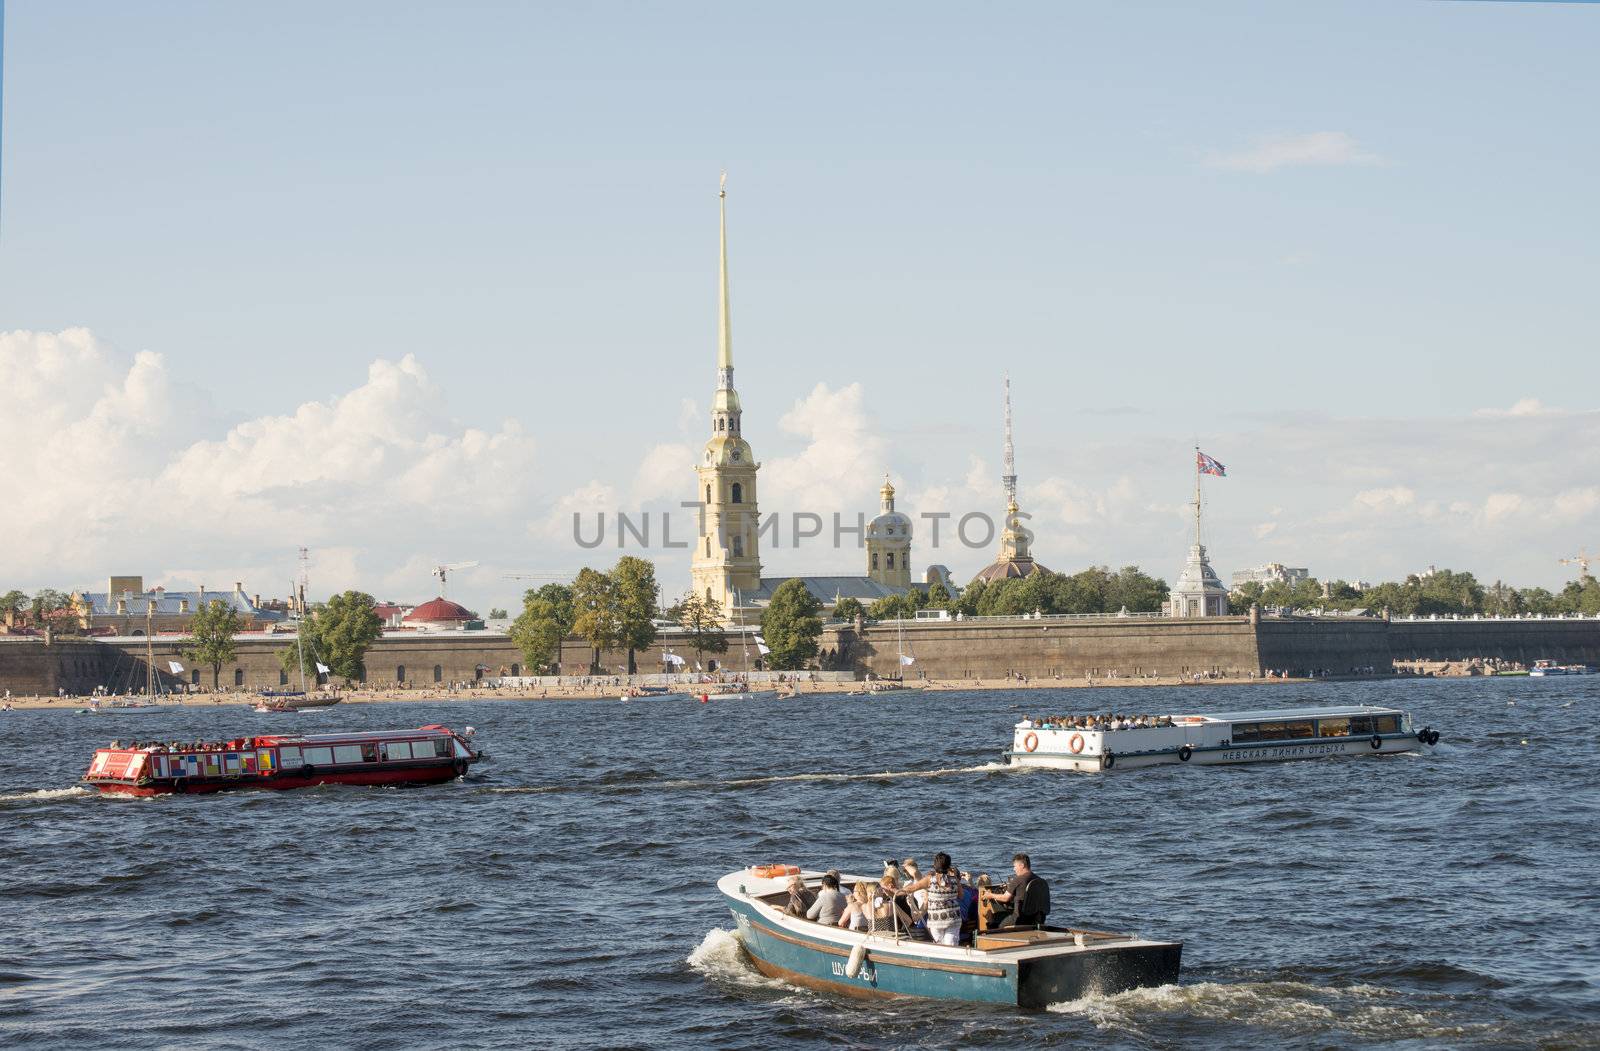 The boats on the Neva river in Sank Petersburg, Russia. Taken on September 2012.